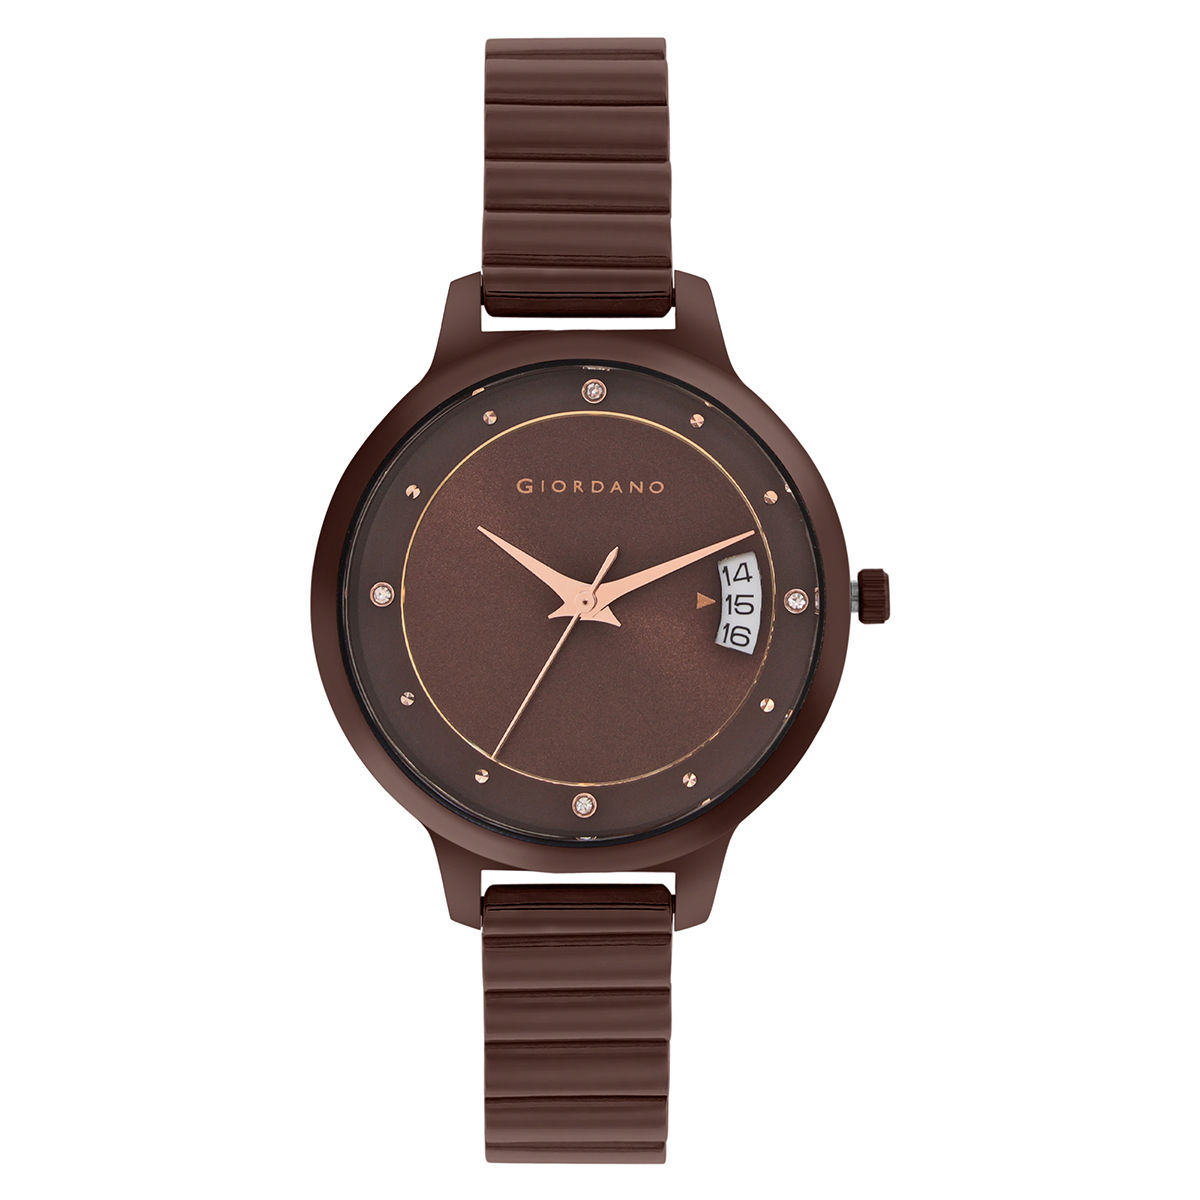 Giordano Brown Dial Analog Watch for Women 3 Hand Mechanism - GD4206